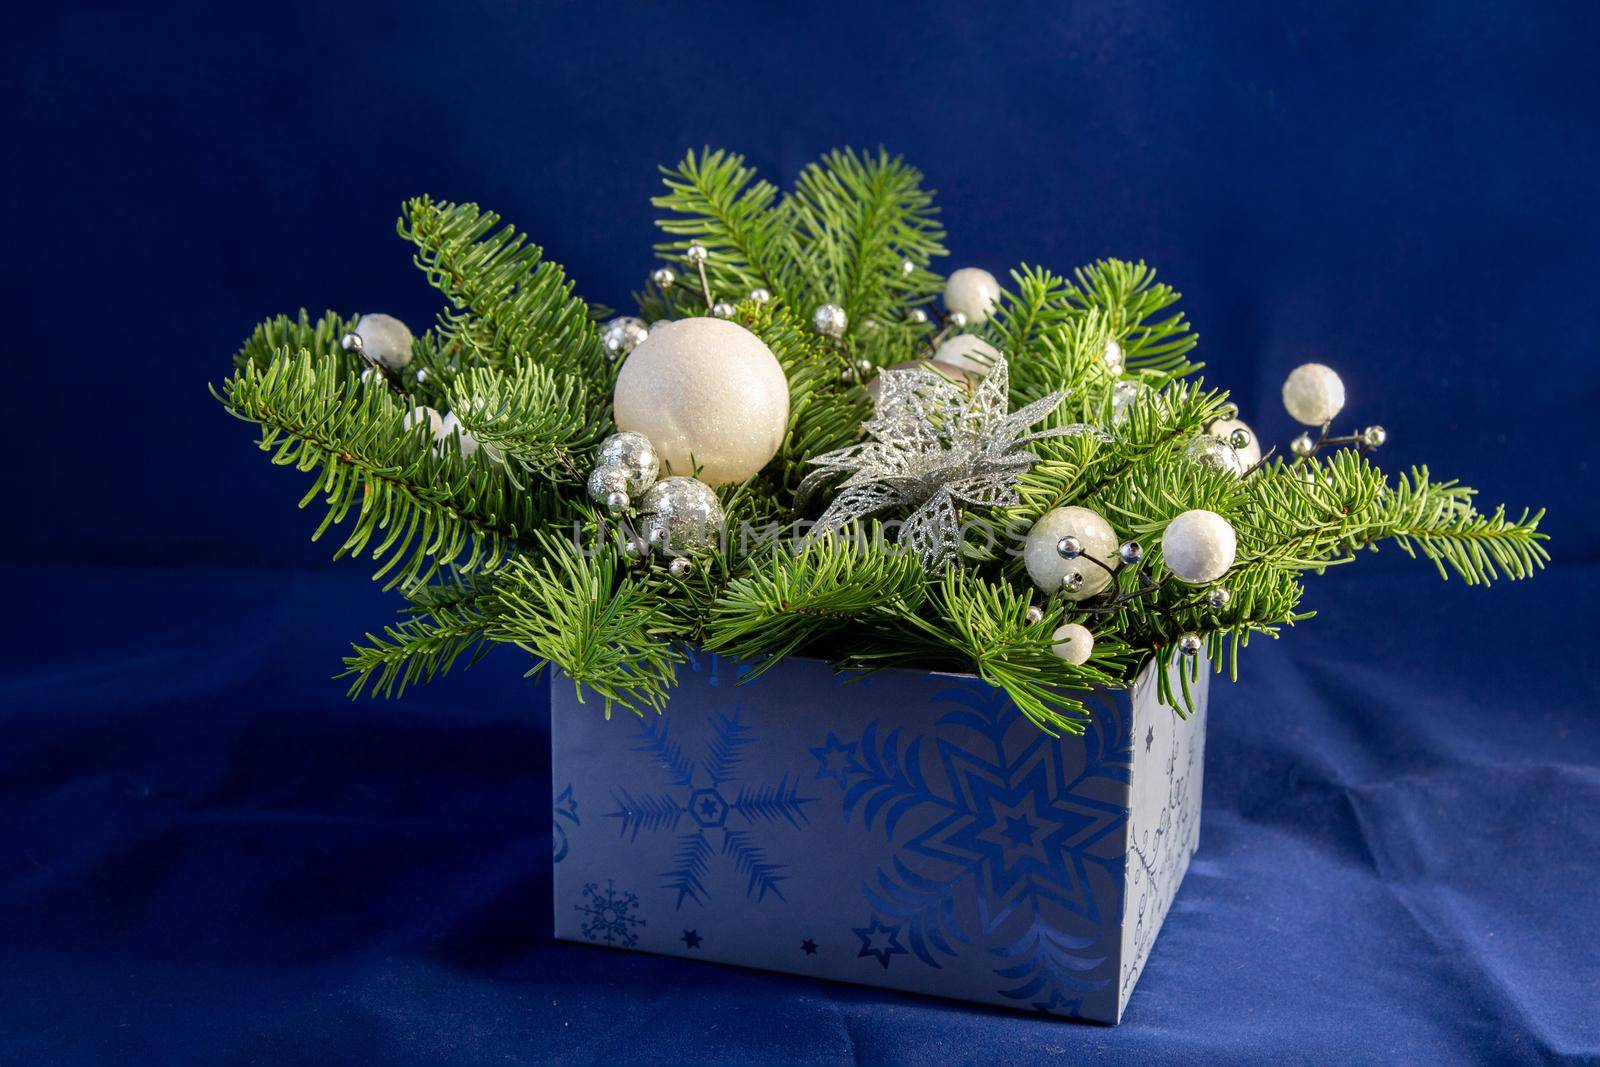 Christmas composition with conifers in yokes and white balls in a blue box on blue background